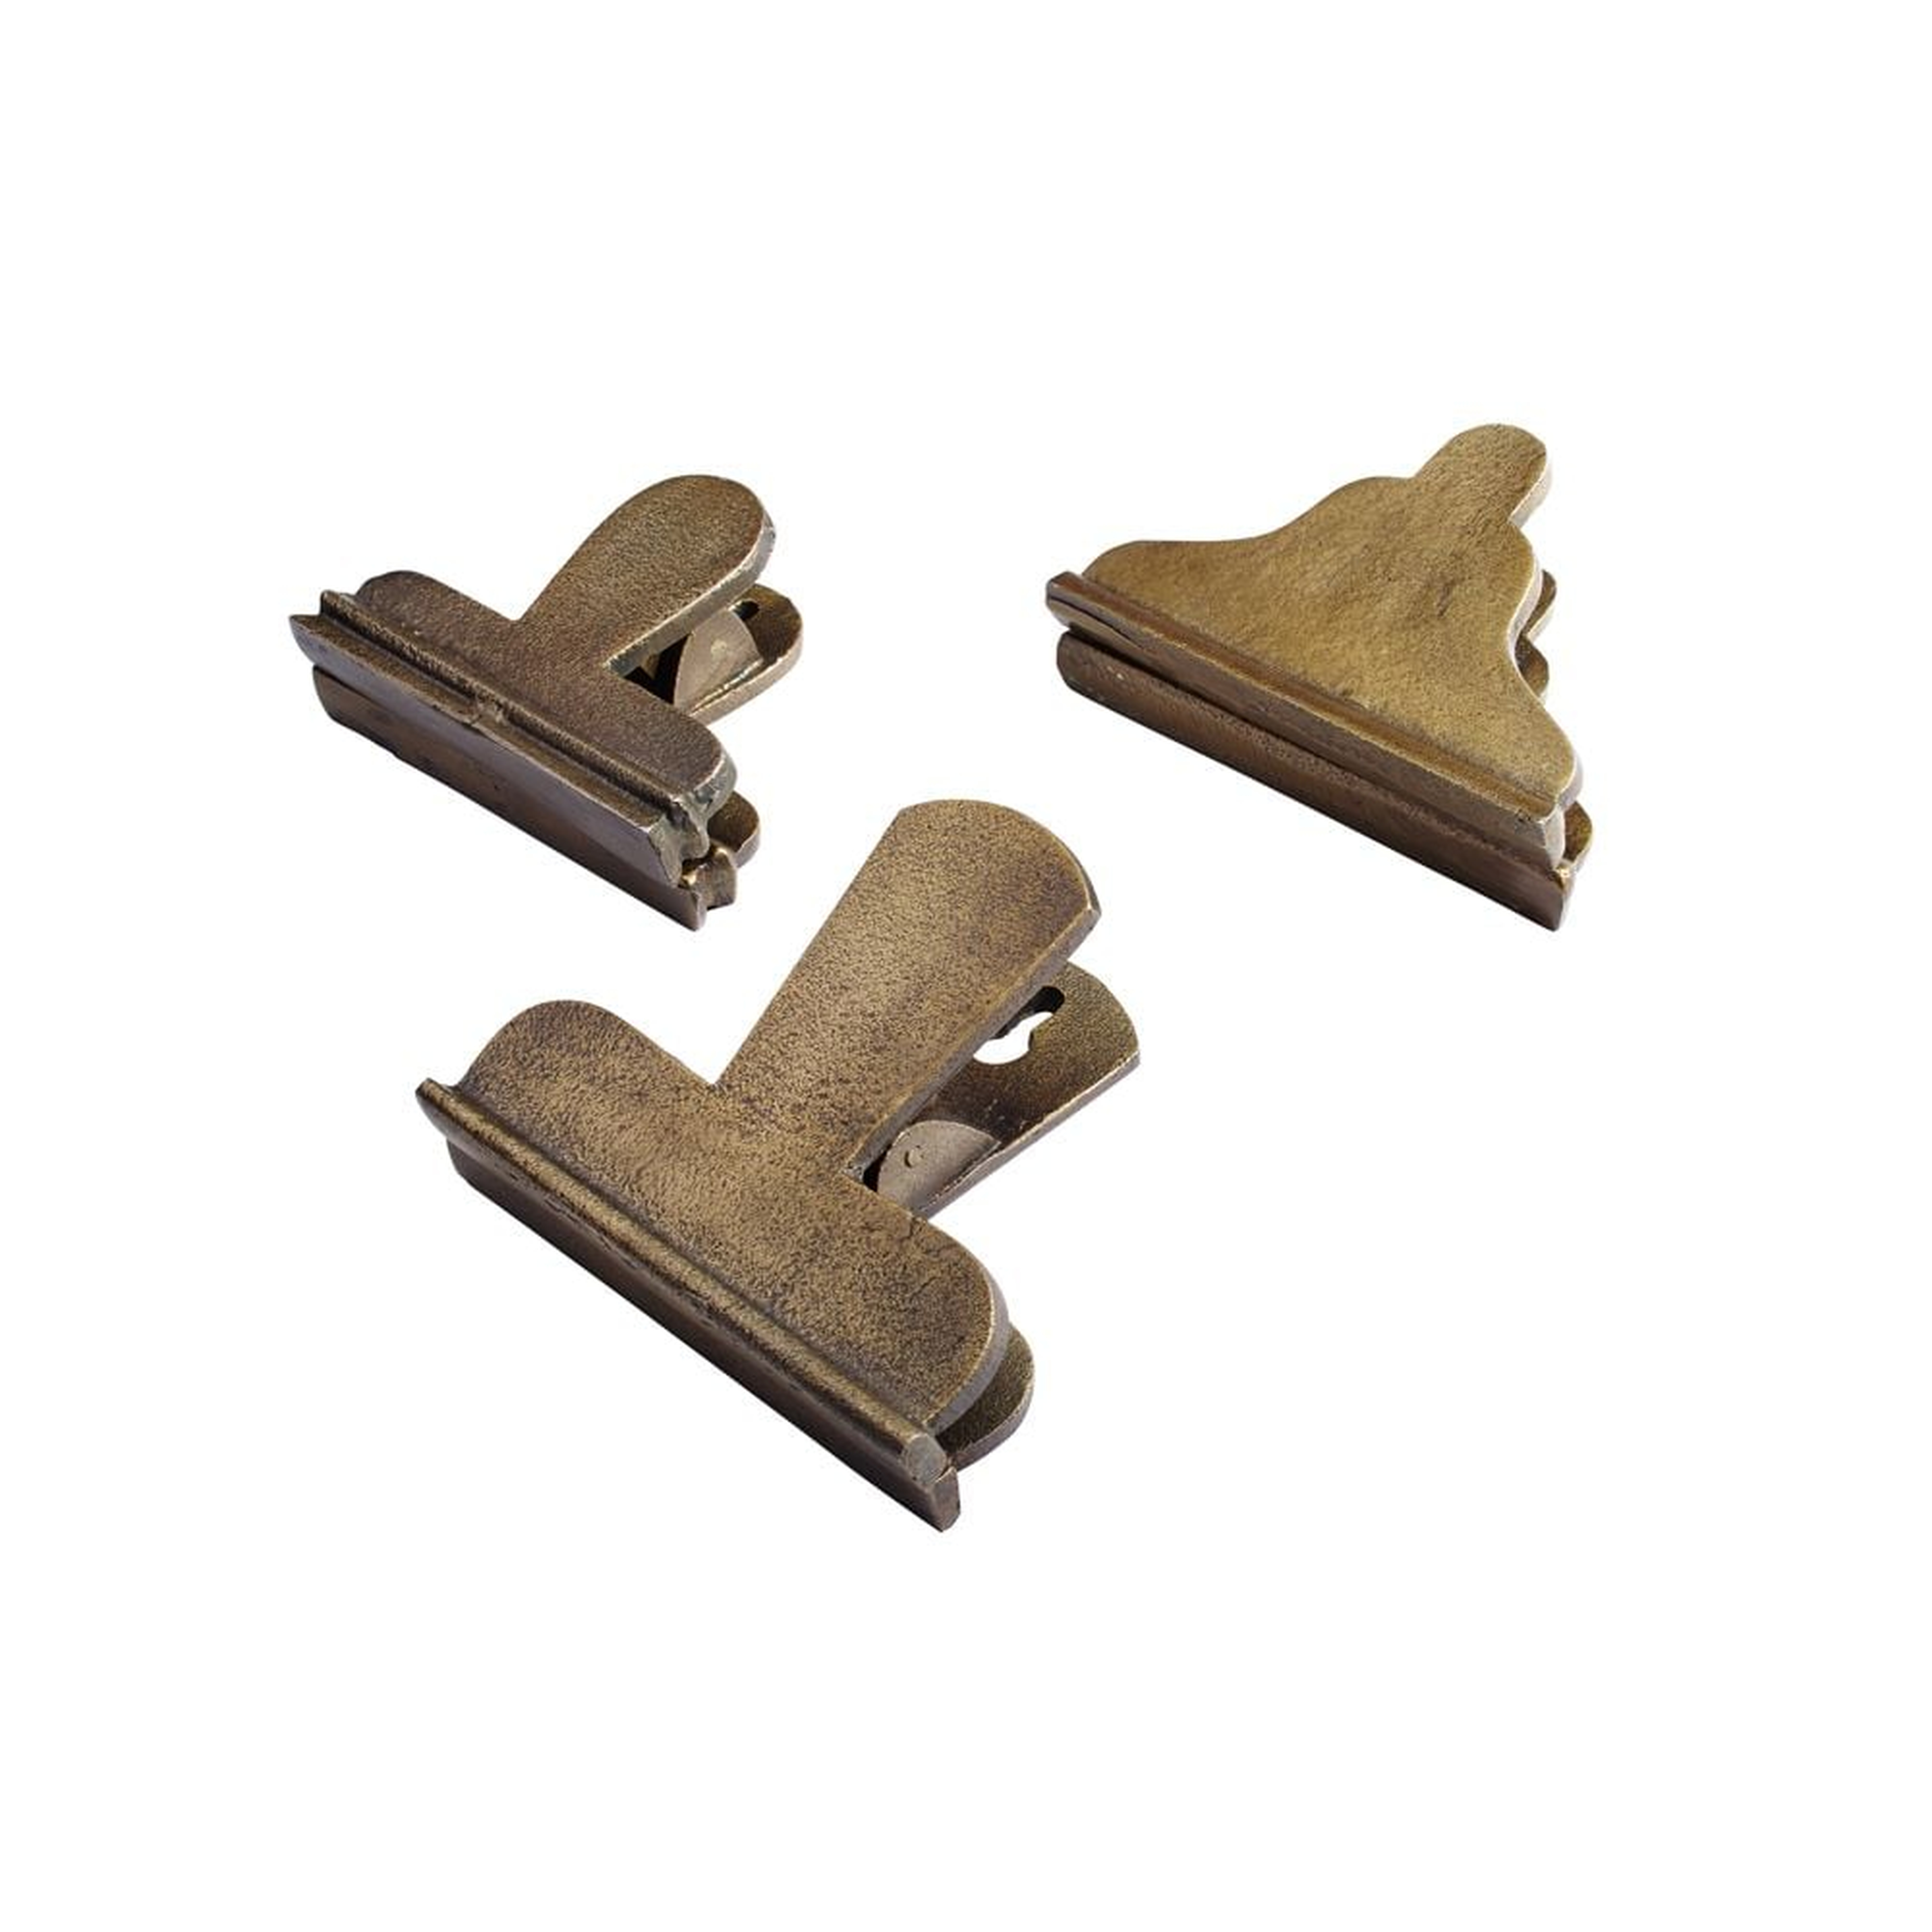 Gallery Wall Clips, Set of 3 - Crate and Barrel